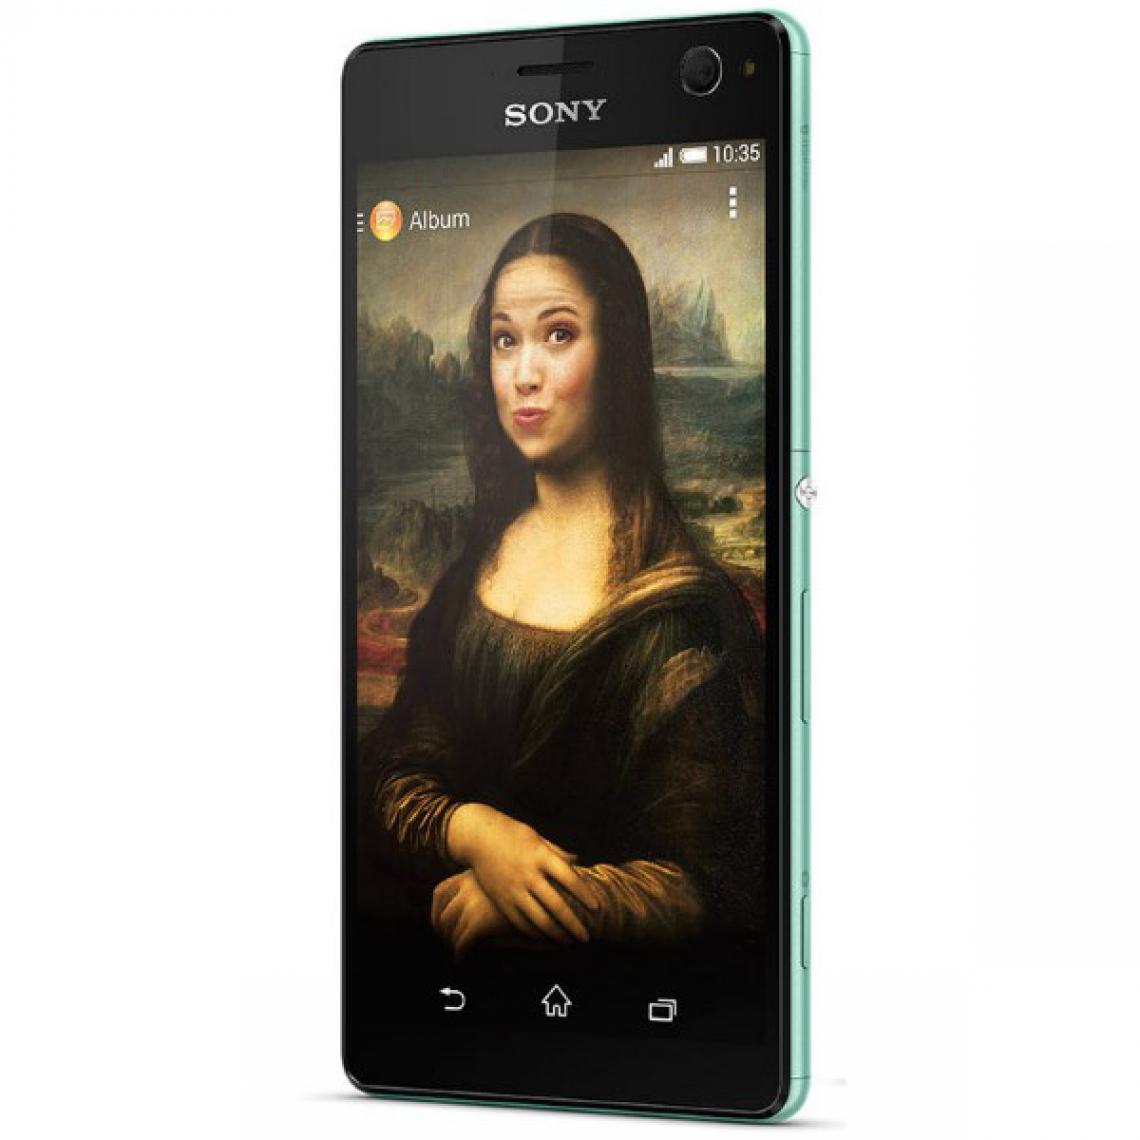 Sony - Sony Xperia C4 E5303 4G menthe débloqué - Smartphone Android